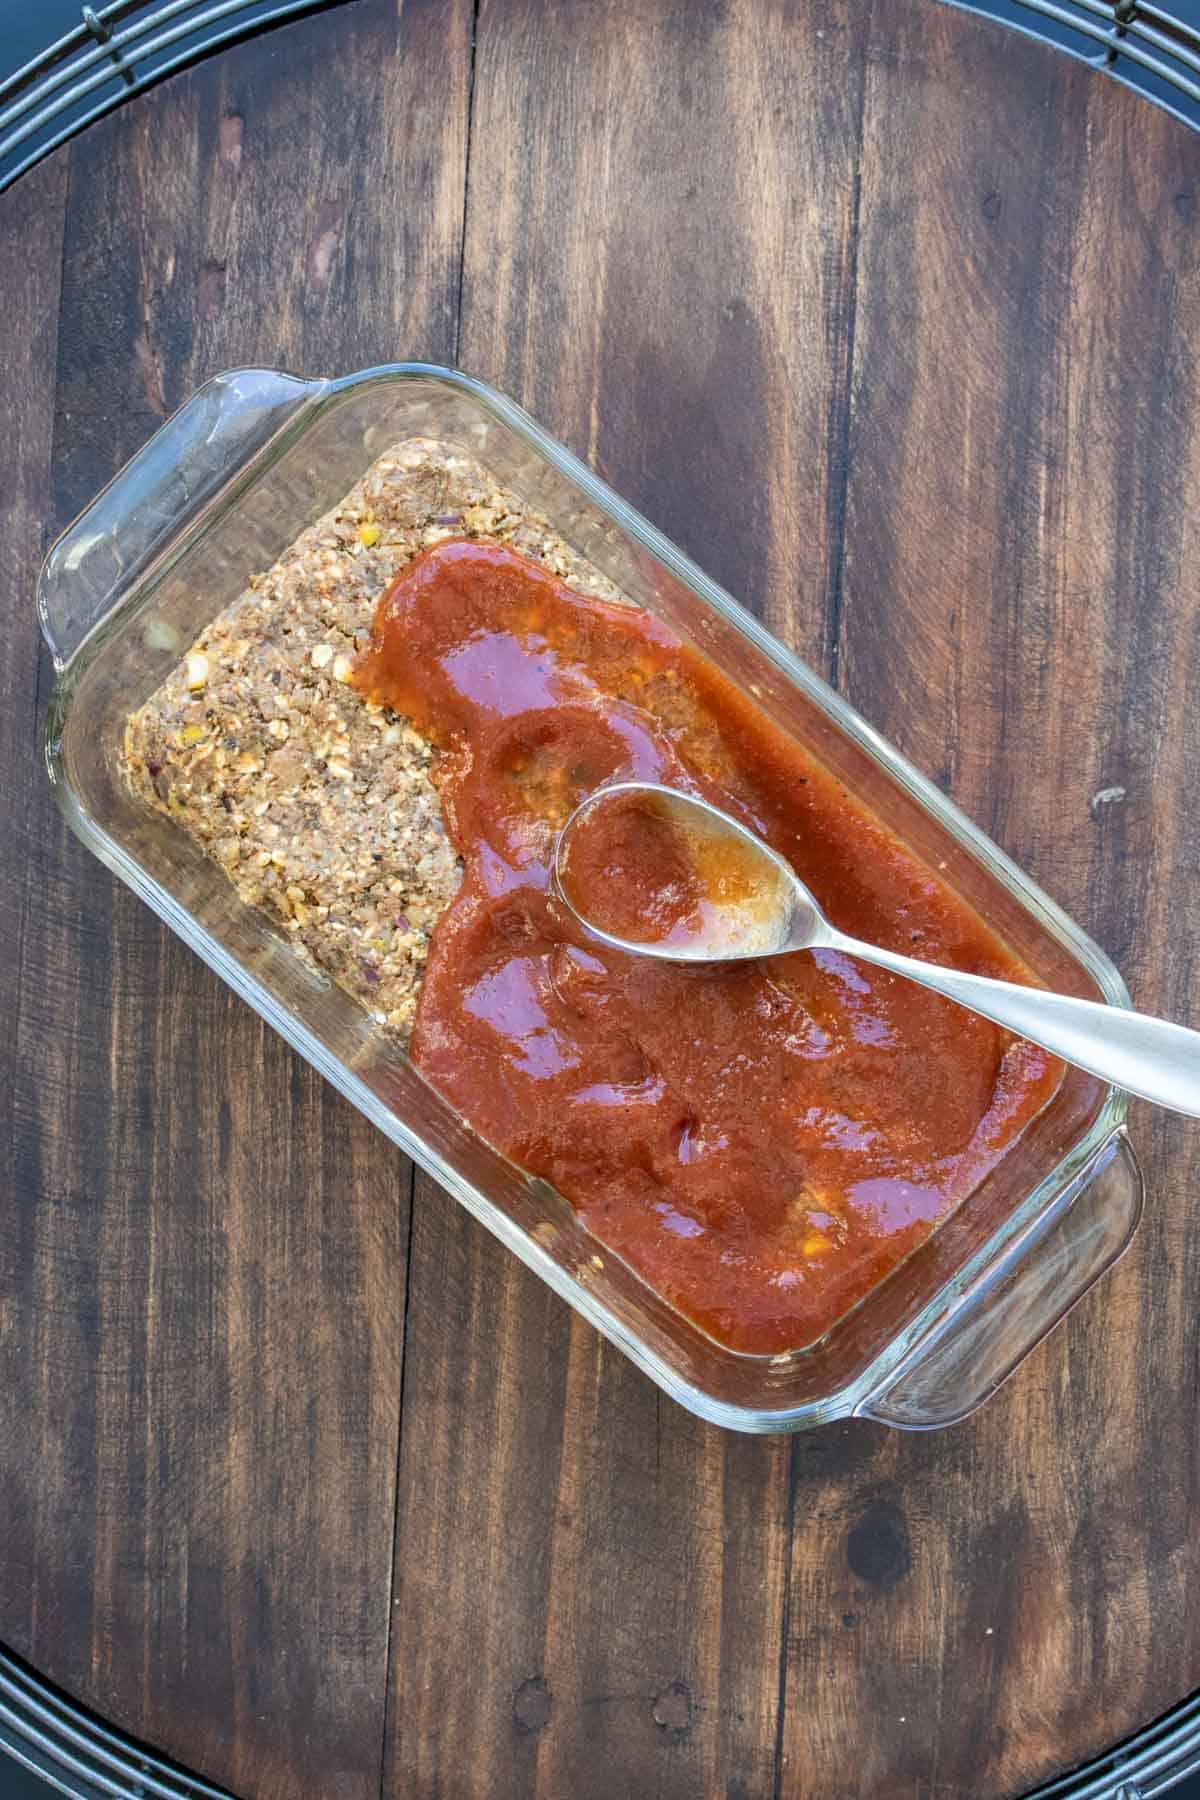 A spoon spreading barbecue sauce on lentil meatloaf mix in a glass pan.